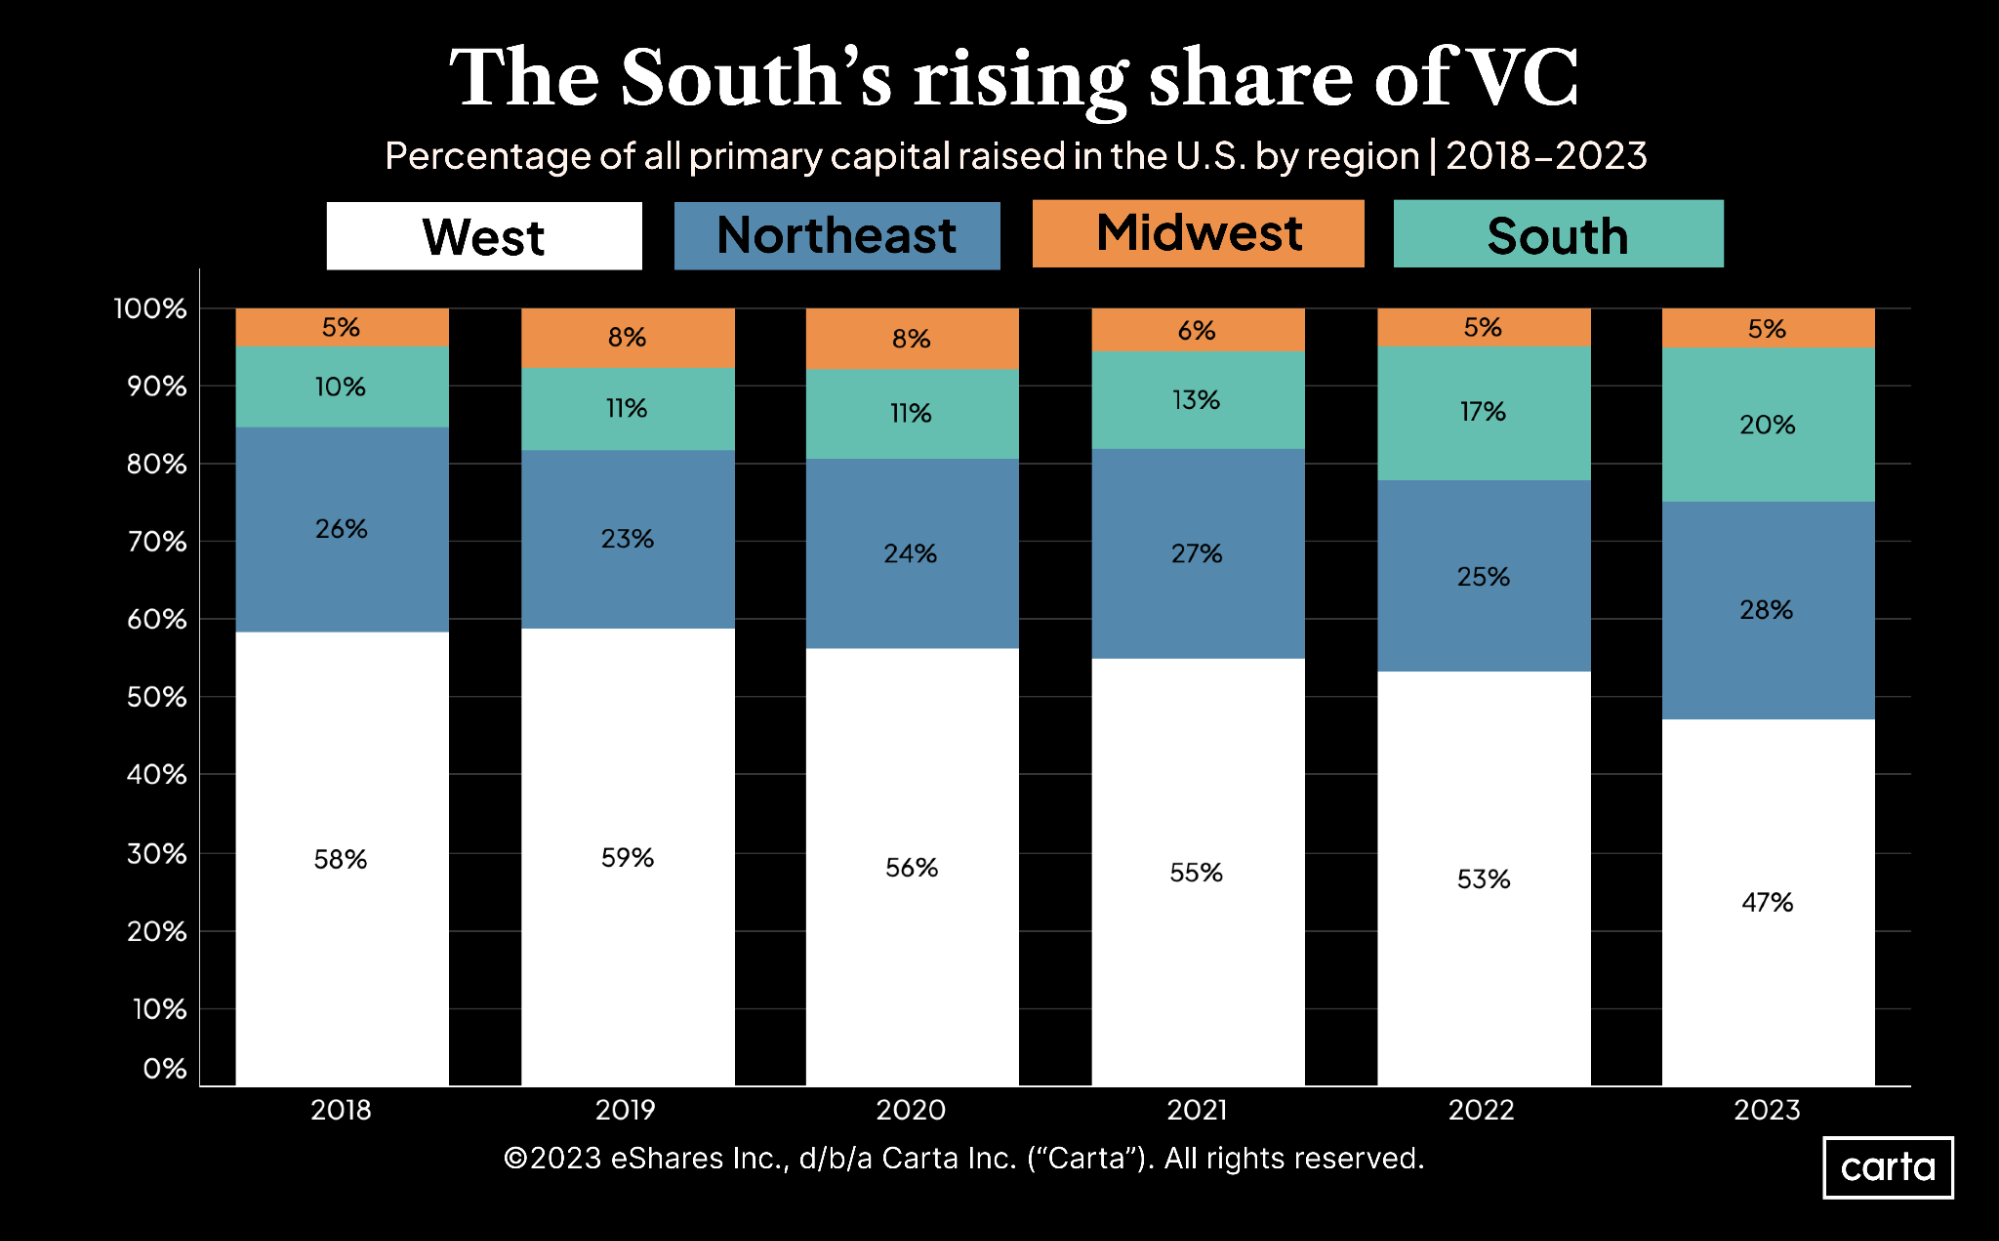 The South's rising share of VC